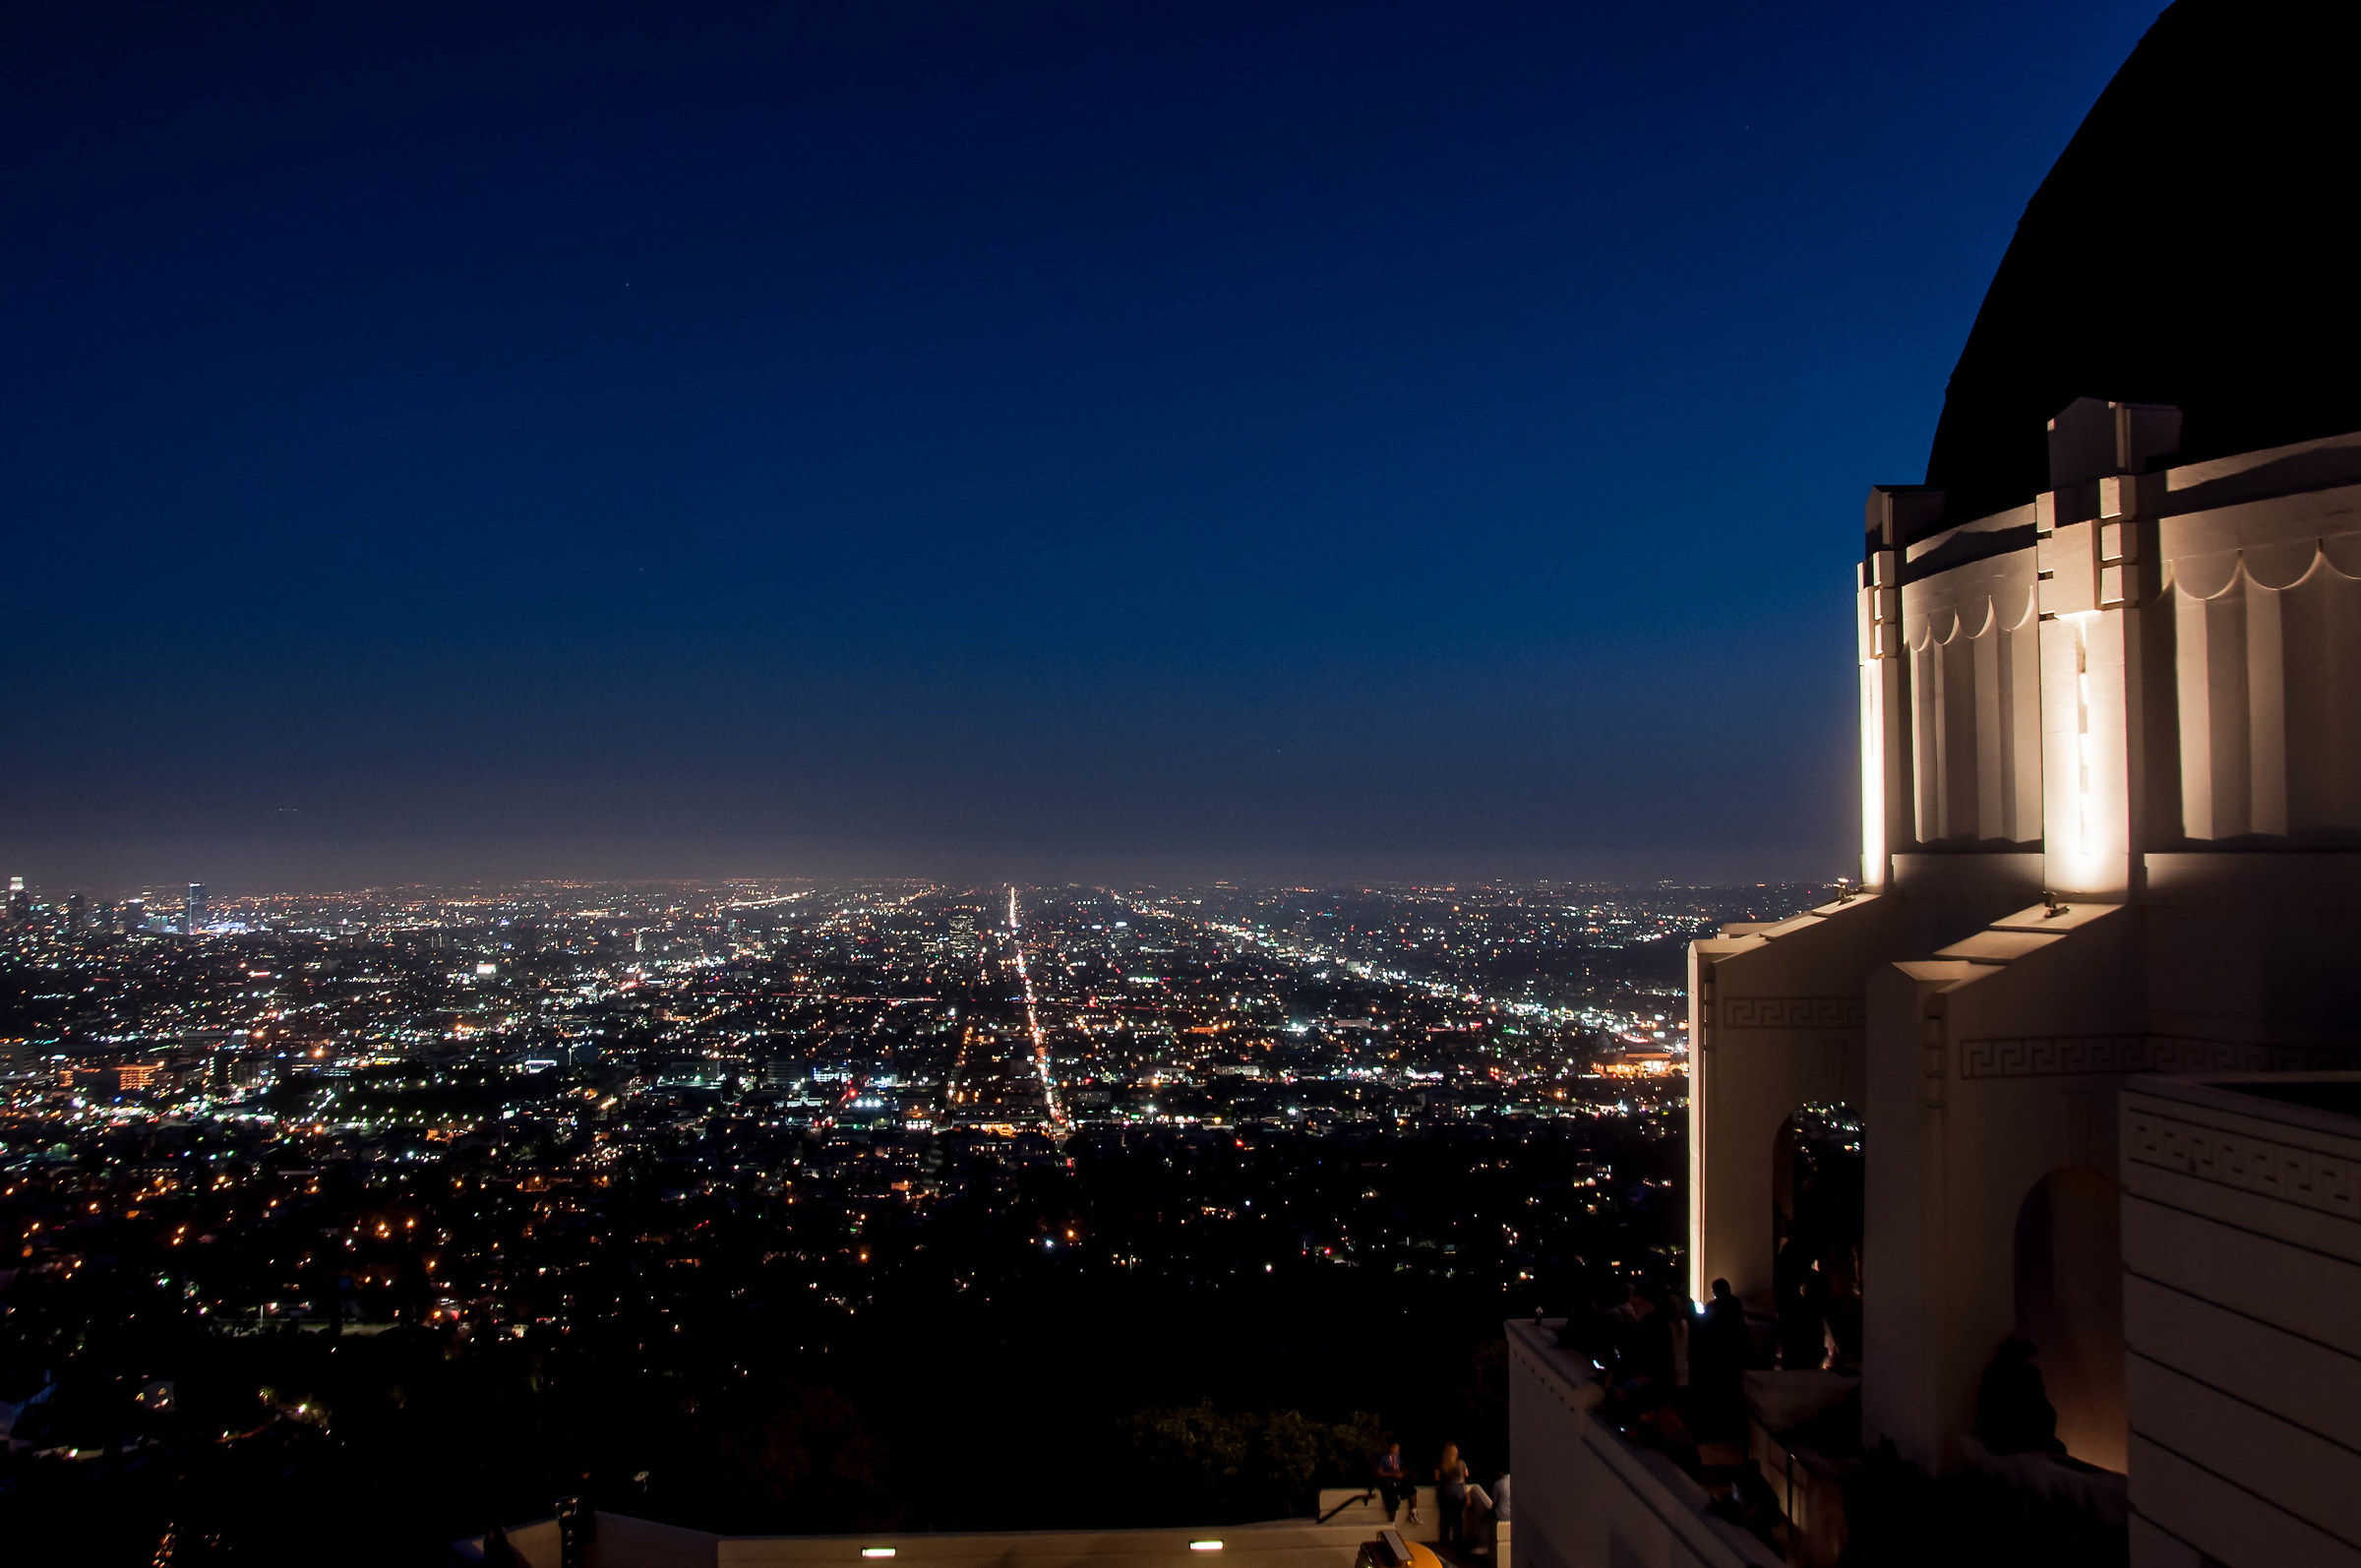 LA from the Griffith Observatory....